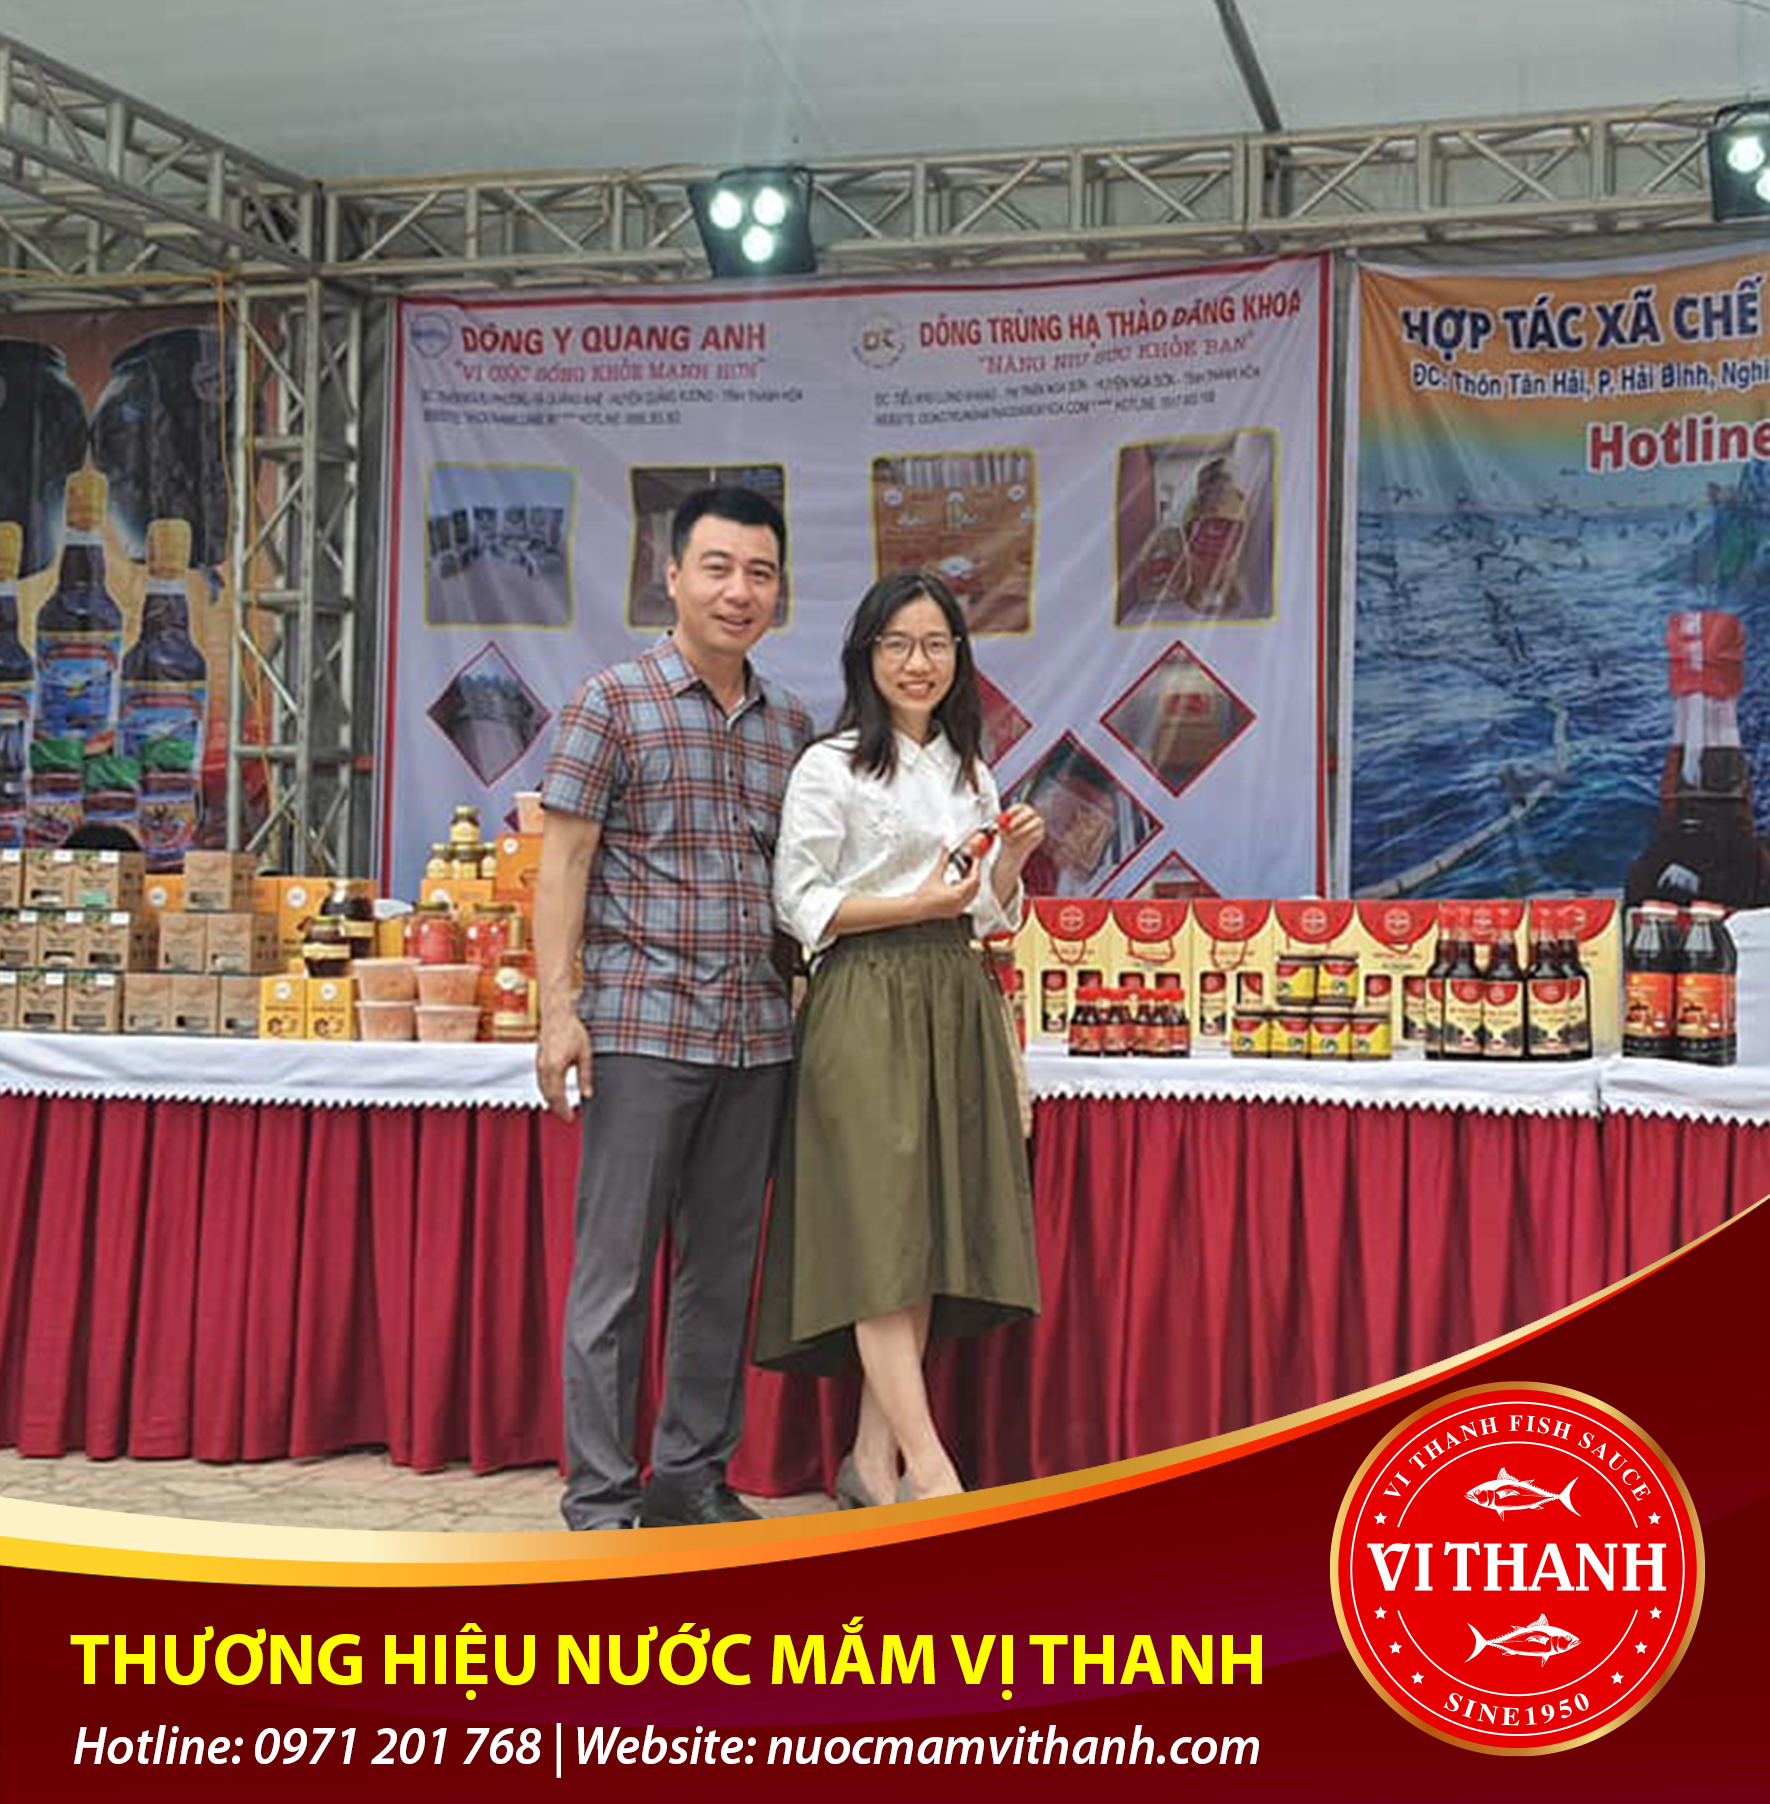 http://nuocmamvithanh.com/admin/uploadpicture/che%20anh_vithanh120b.png